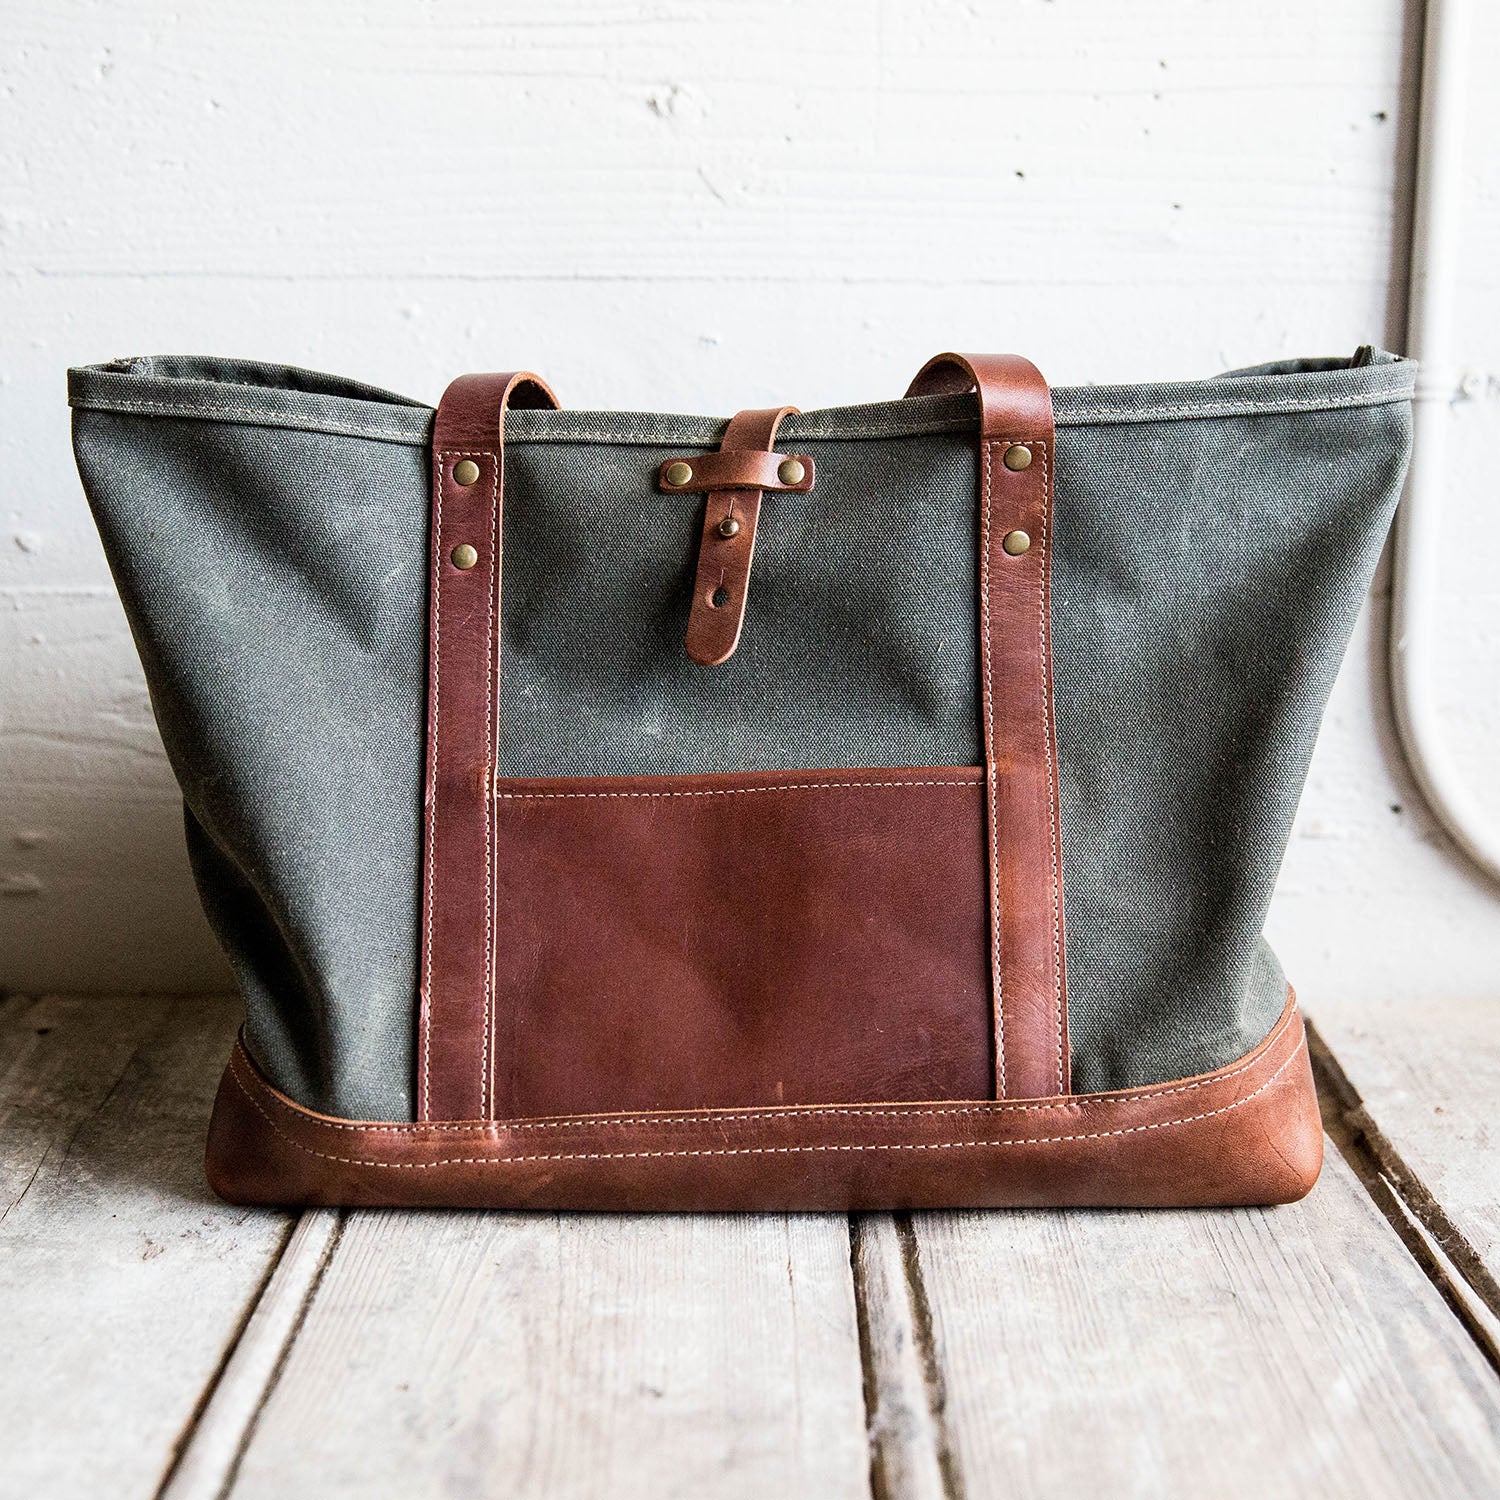 tools / heavy duty utilitarian canvas tote bag SMALL – LOST WAX STUDIO NYC  - made in nyc